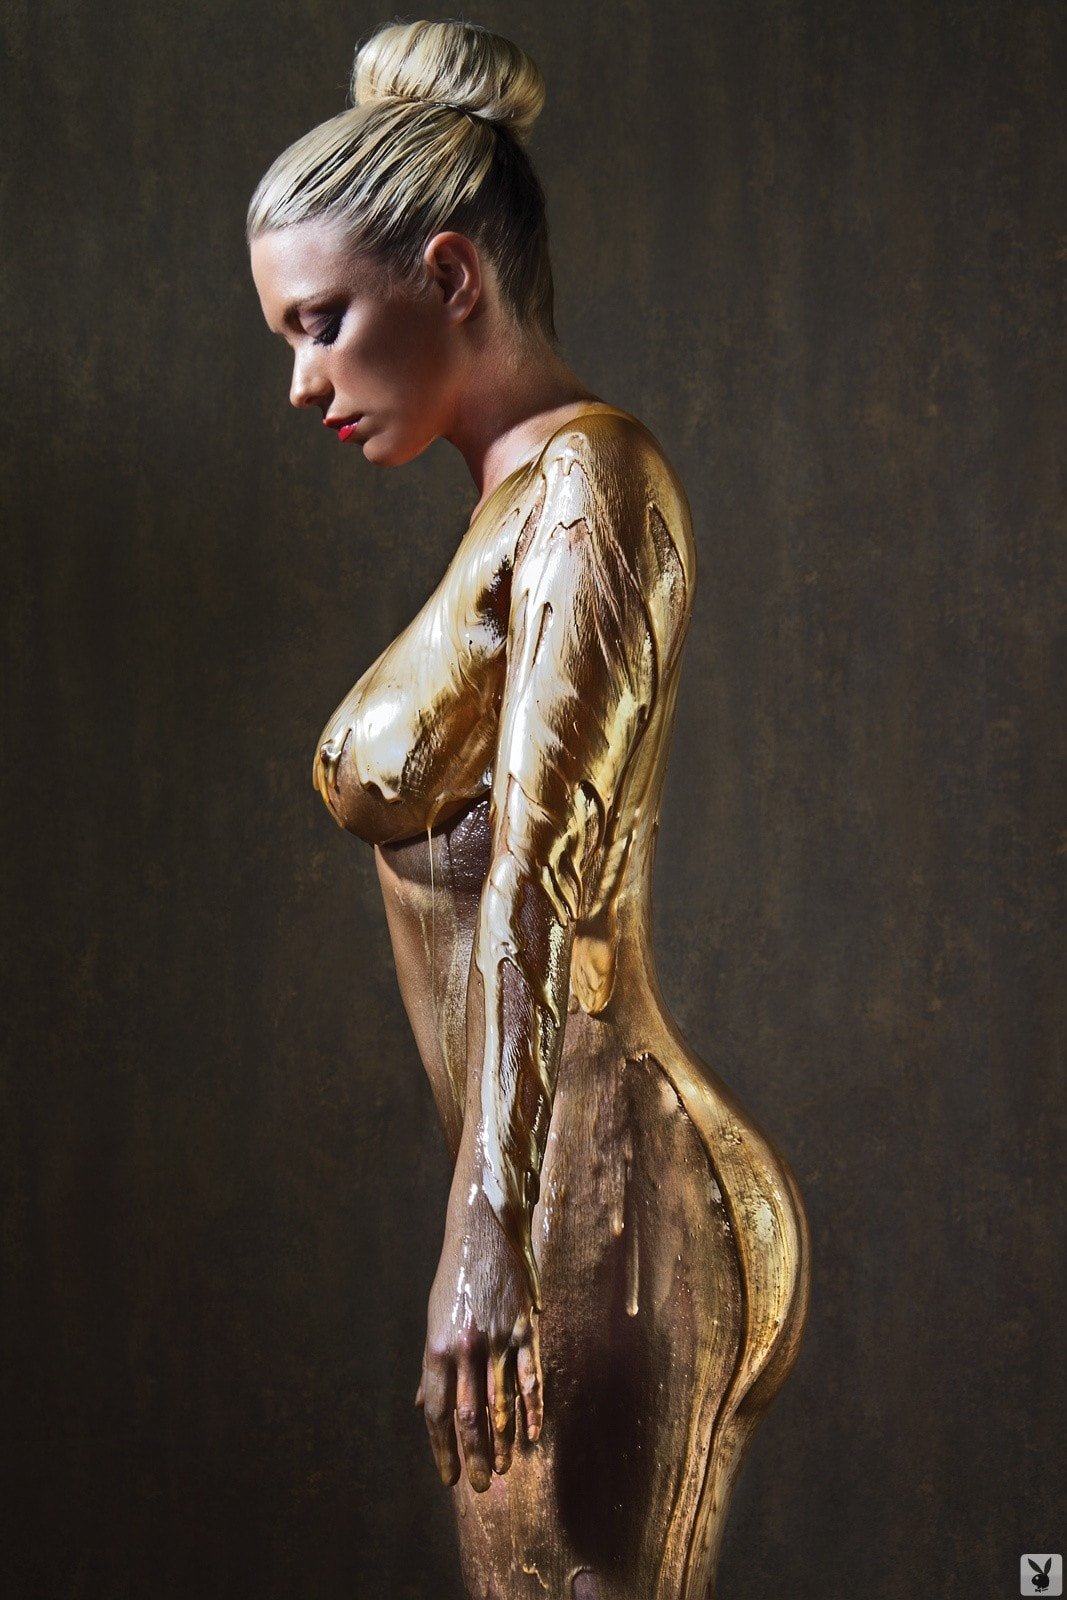 April Summers looks stunning in gold